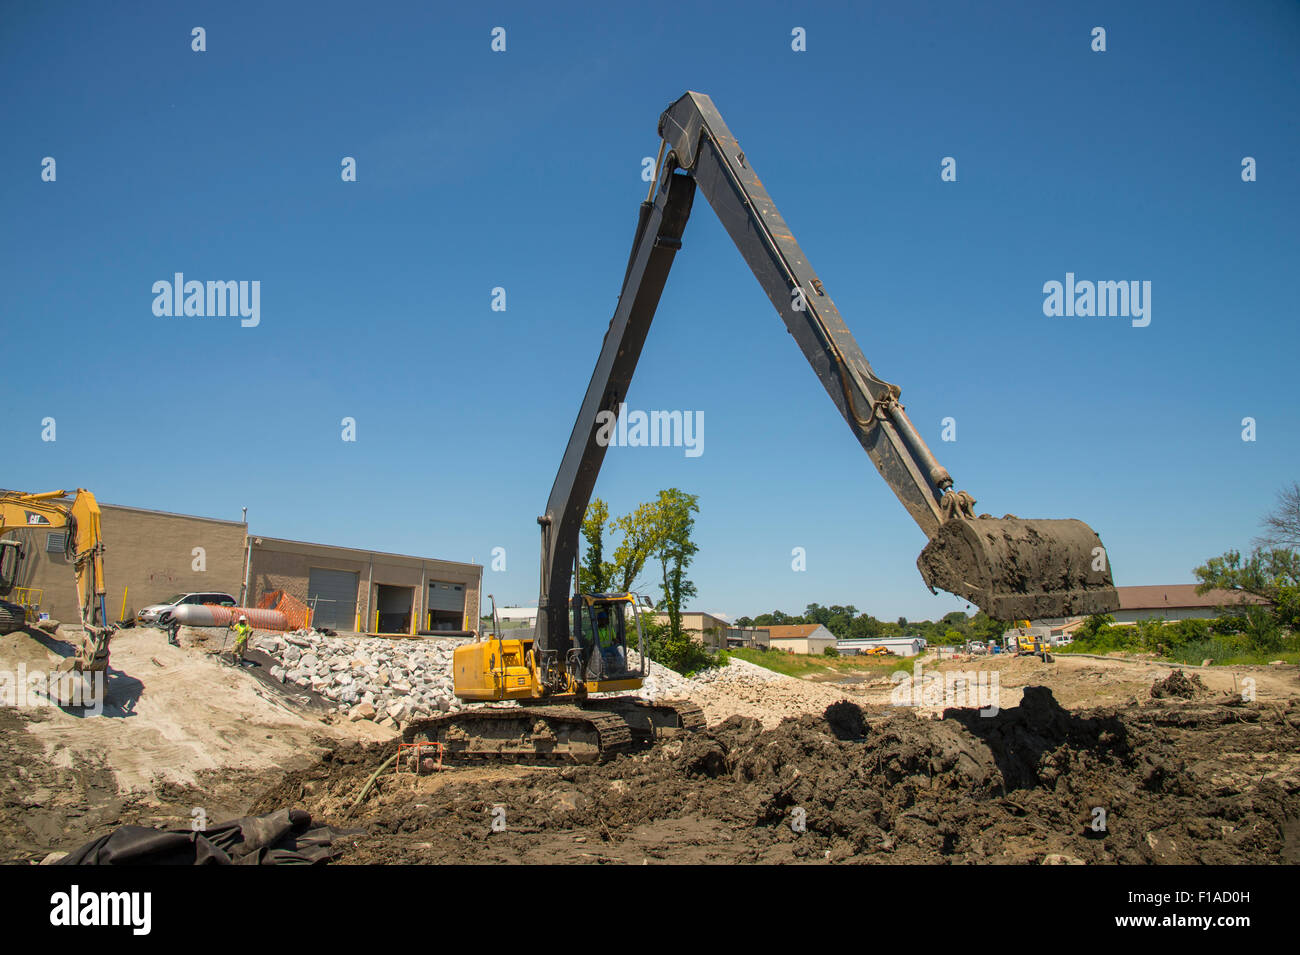 Large Backhoe At Construction Site Stock Photo